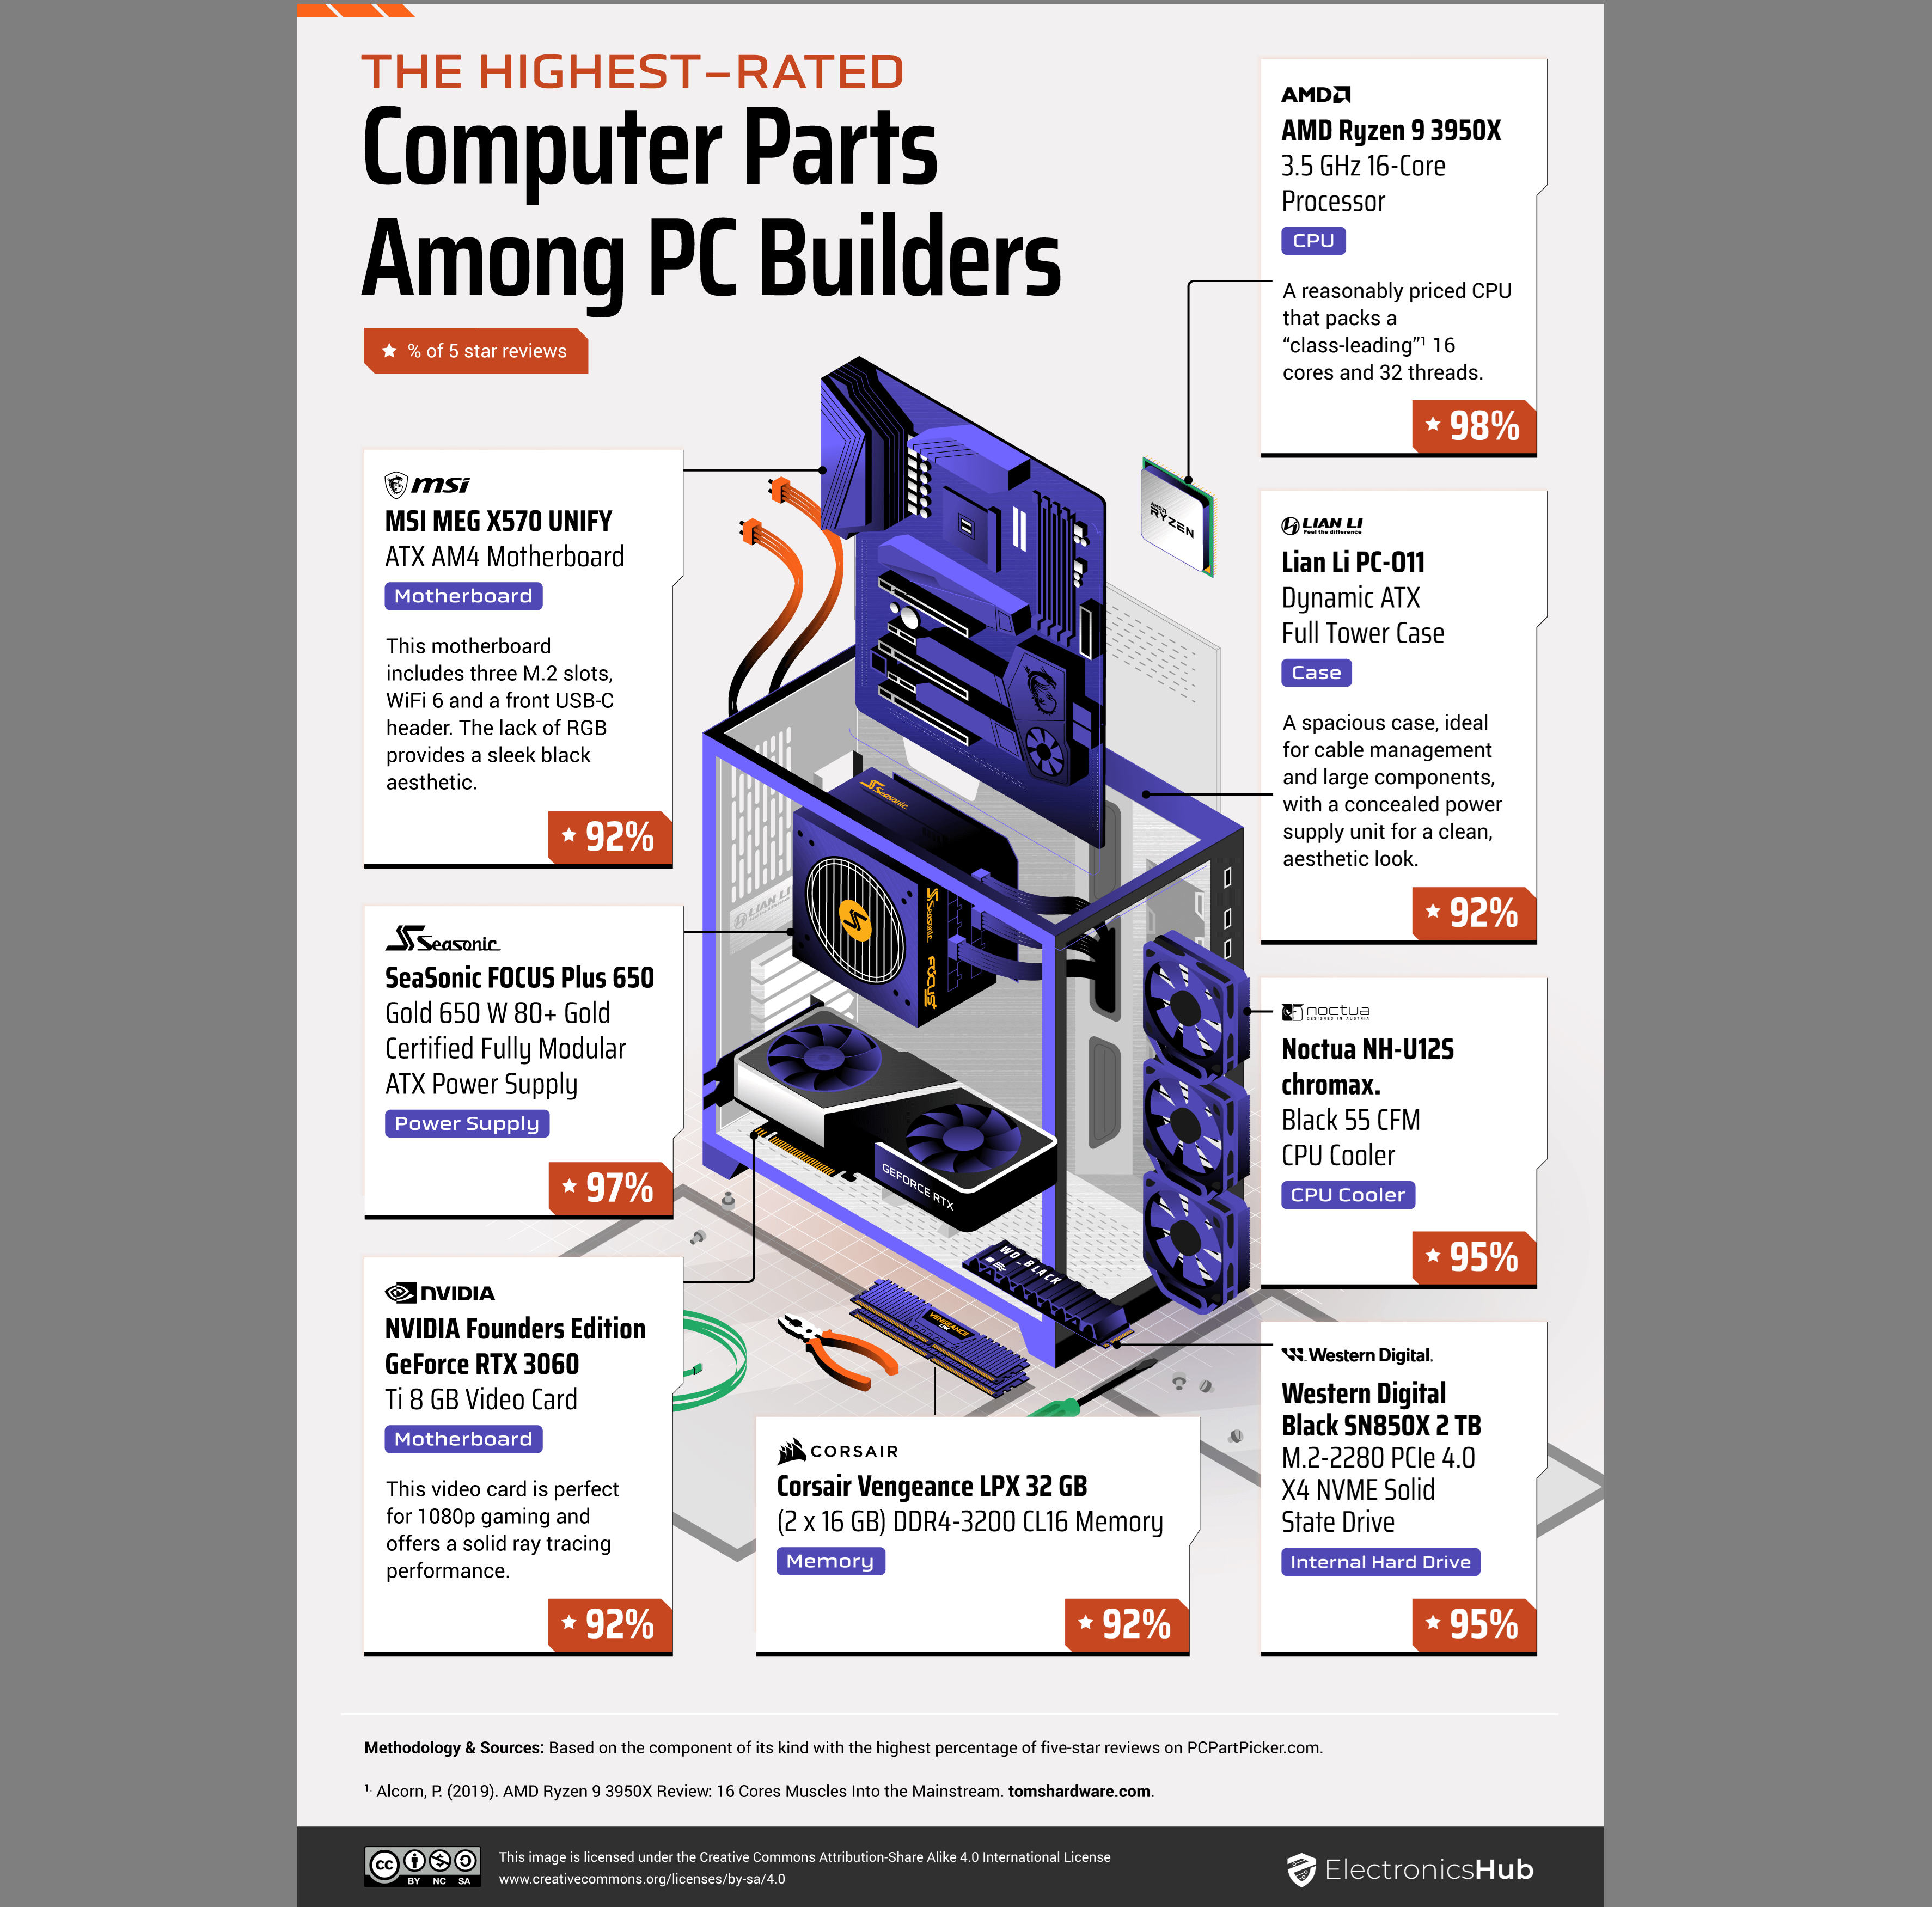 Electronics Hub reveals top-rated PC parts for 2022/23 based on reviews and data.